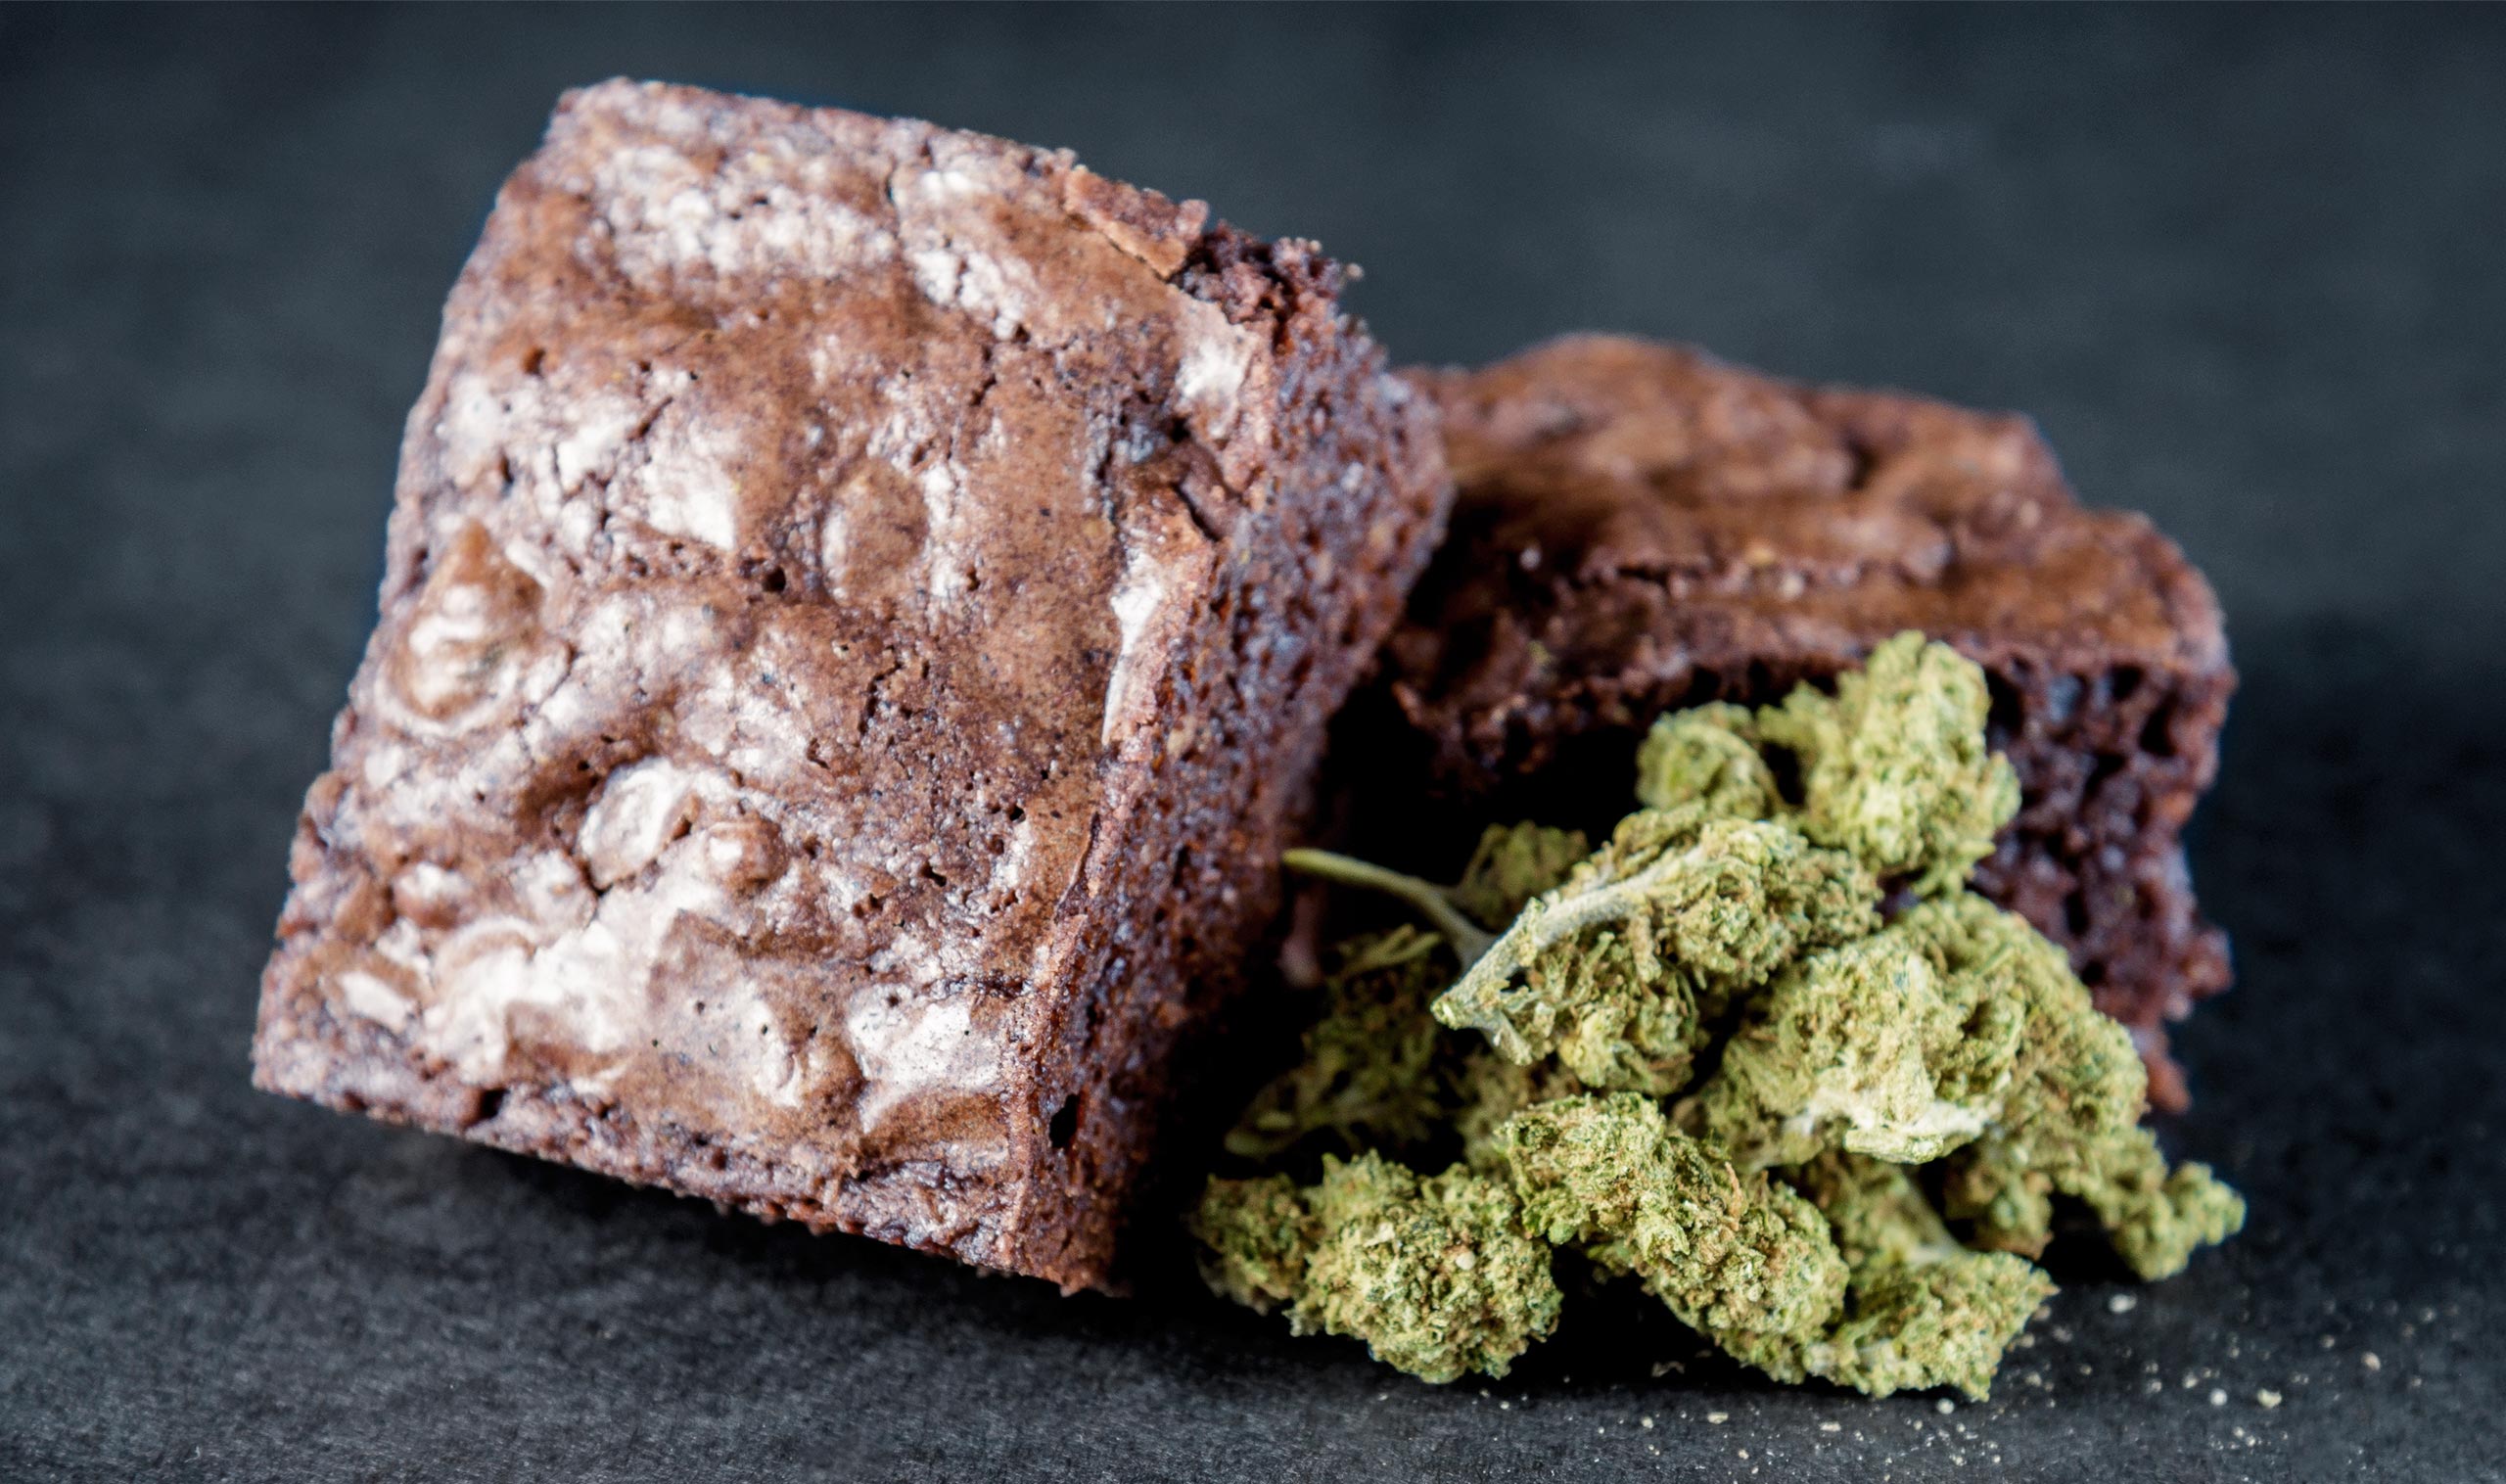 Smoking vs Eating Cannabis: What’s The Difference?